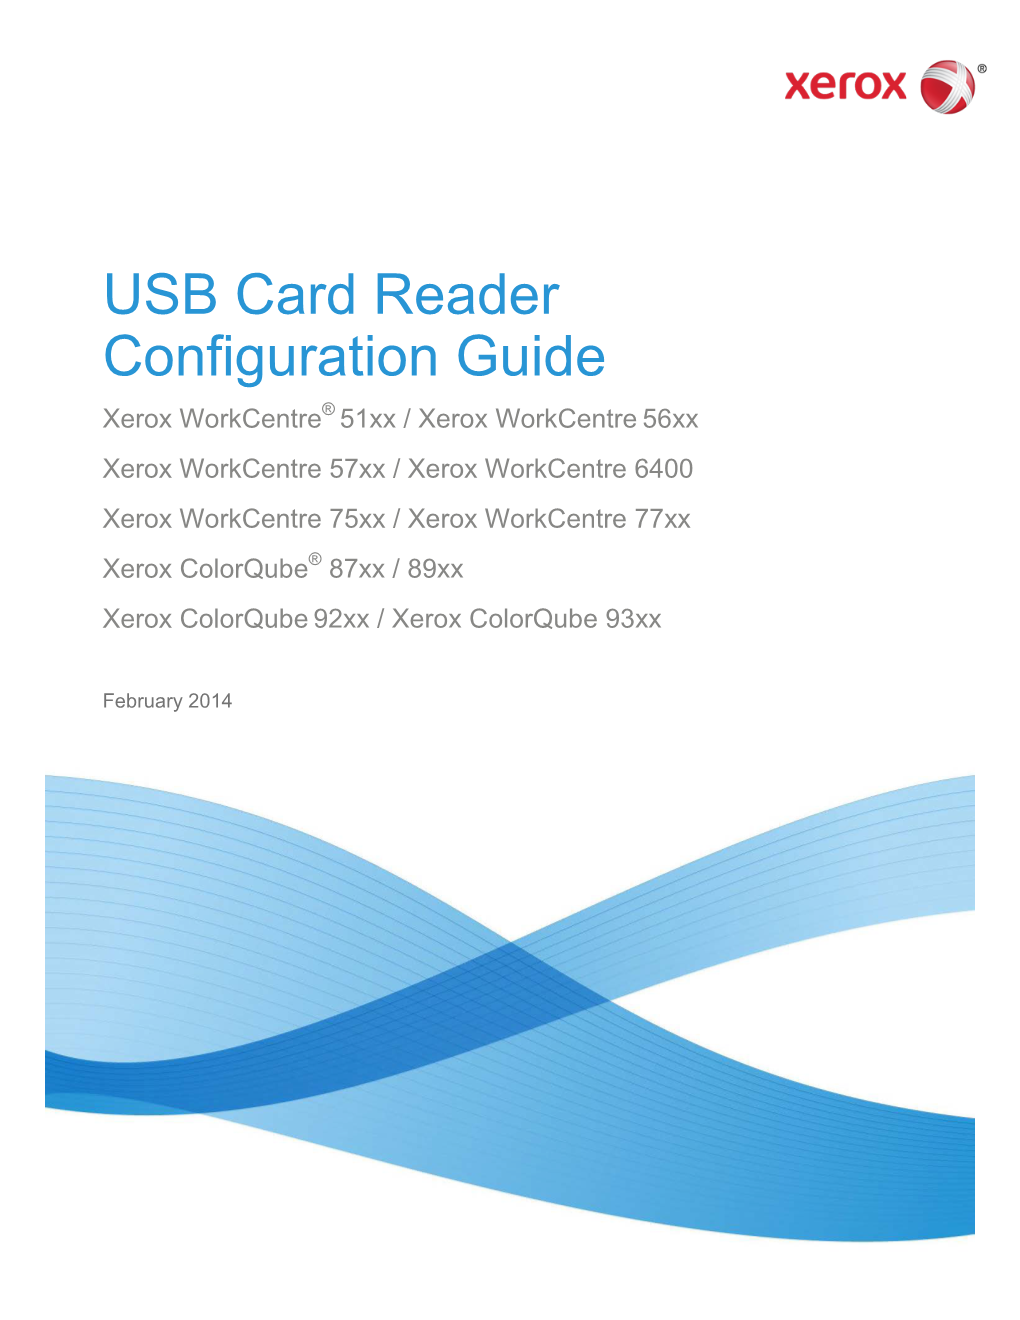 USB Card Reader Configuration Guide